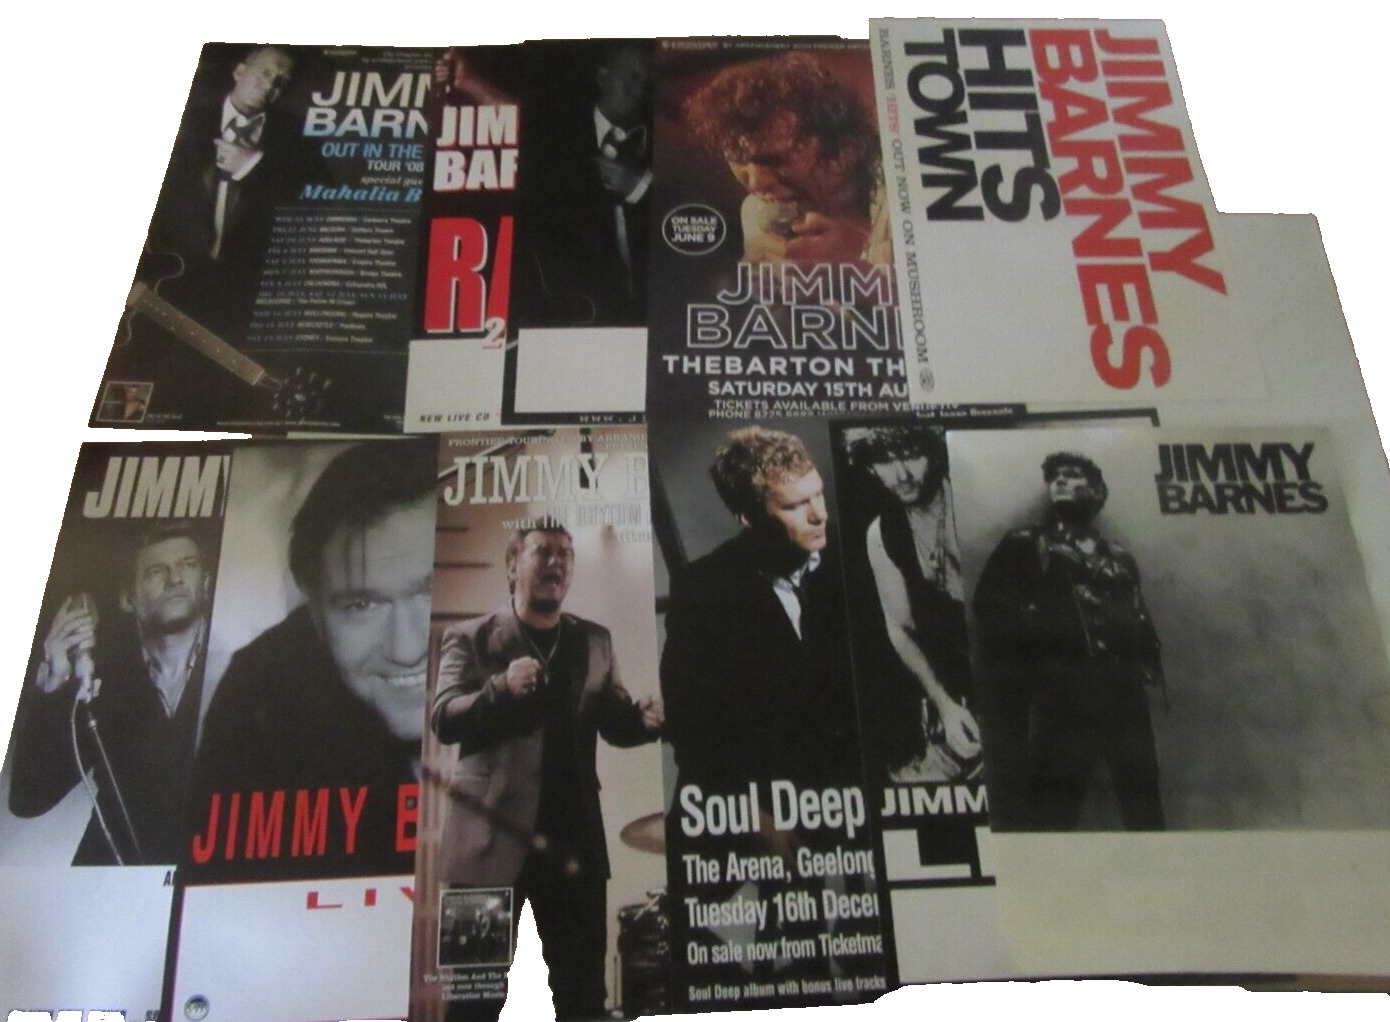 JIMMY BARNES COLLECTION OF 11 ORIGINAL TOUR POSTERS